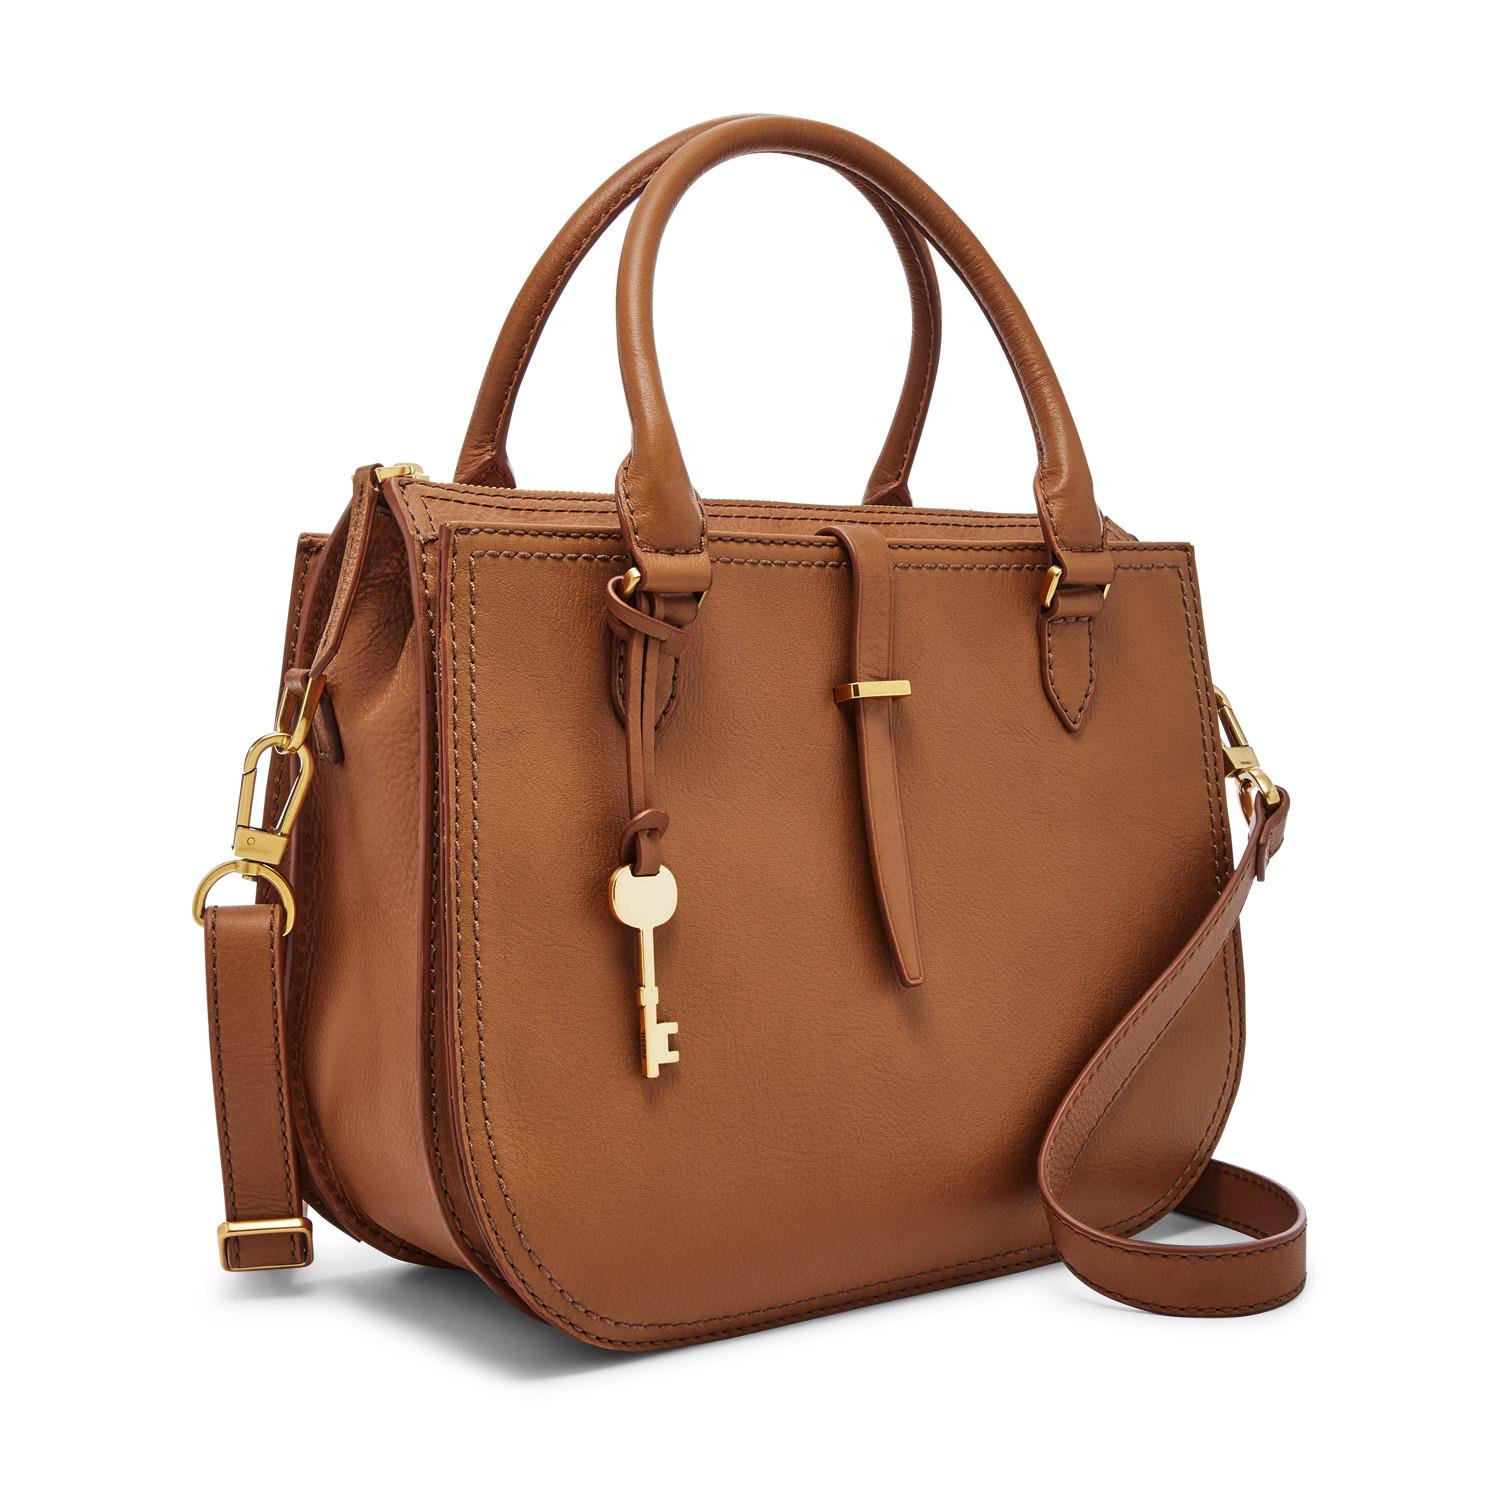 Fossil Leather Ryder Satchel Handbags Tan in Tan/Gold (Brown) - Lyst